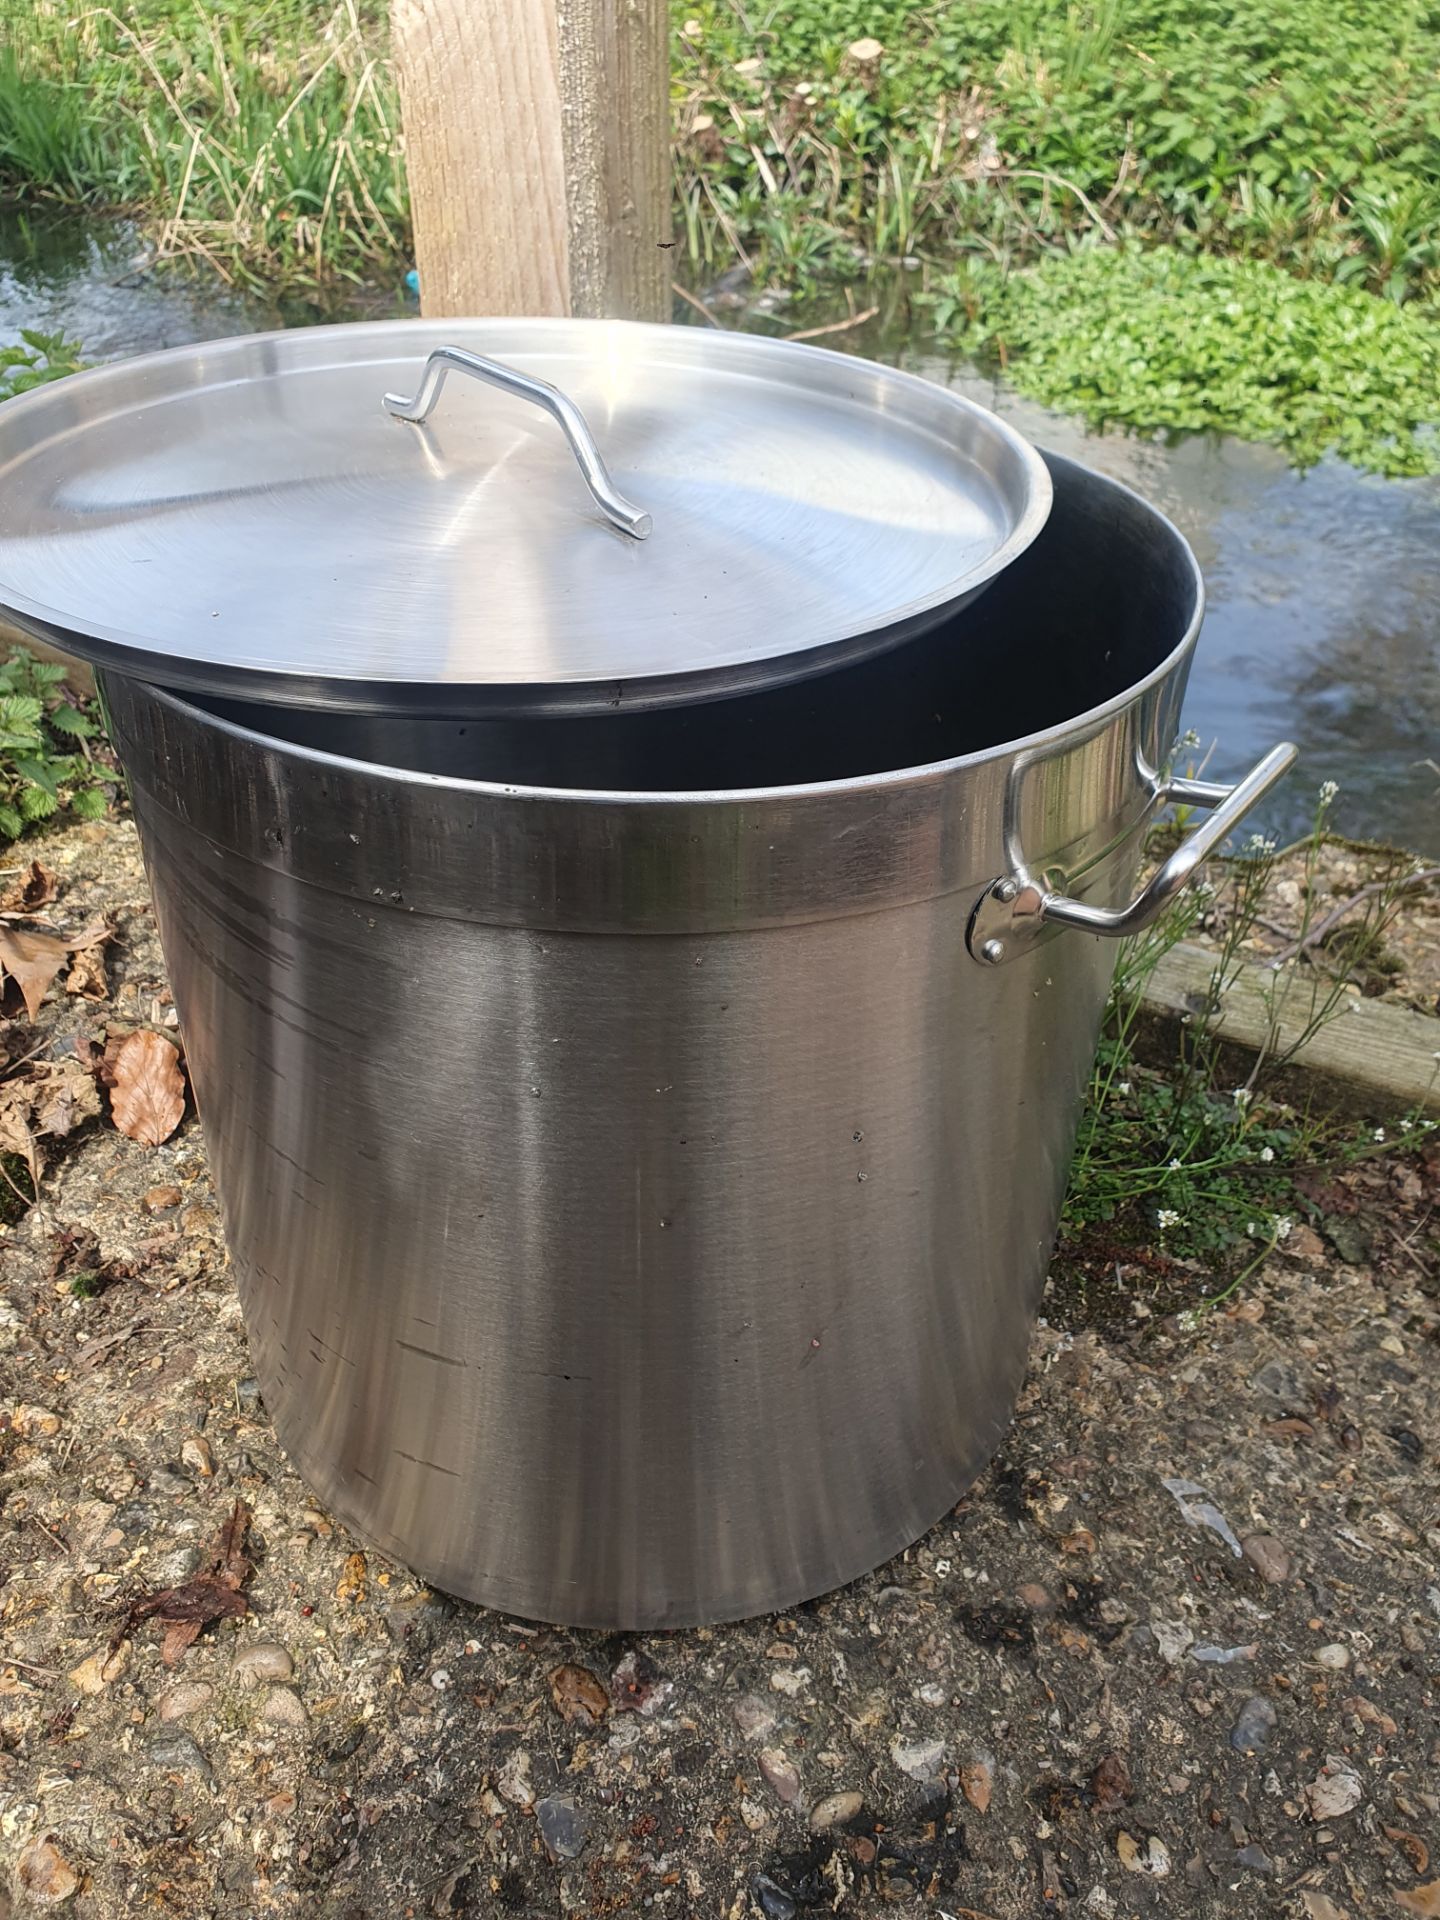 A Set of 5 Large Stainless Steel Pots With Lids. - Image 8 of 18